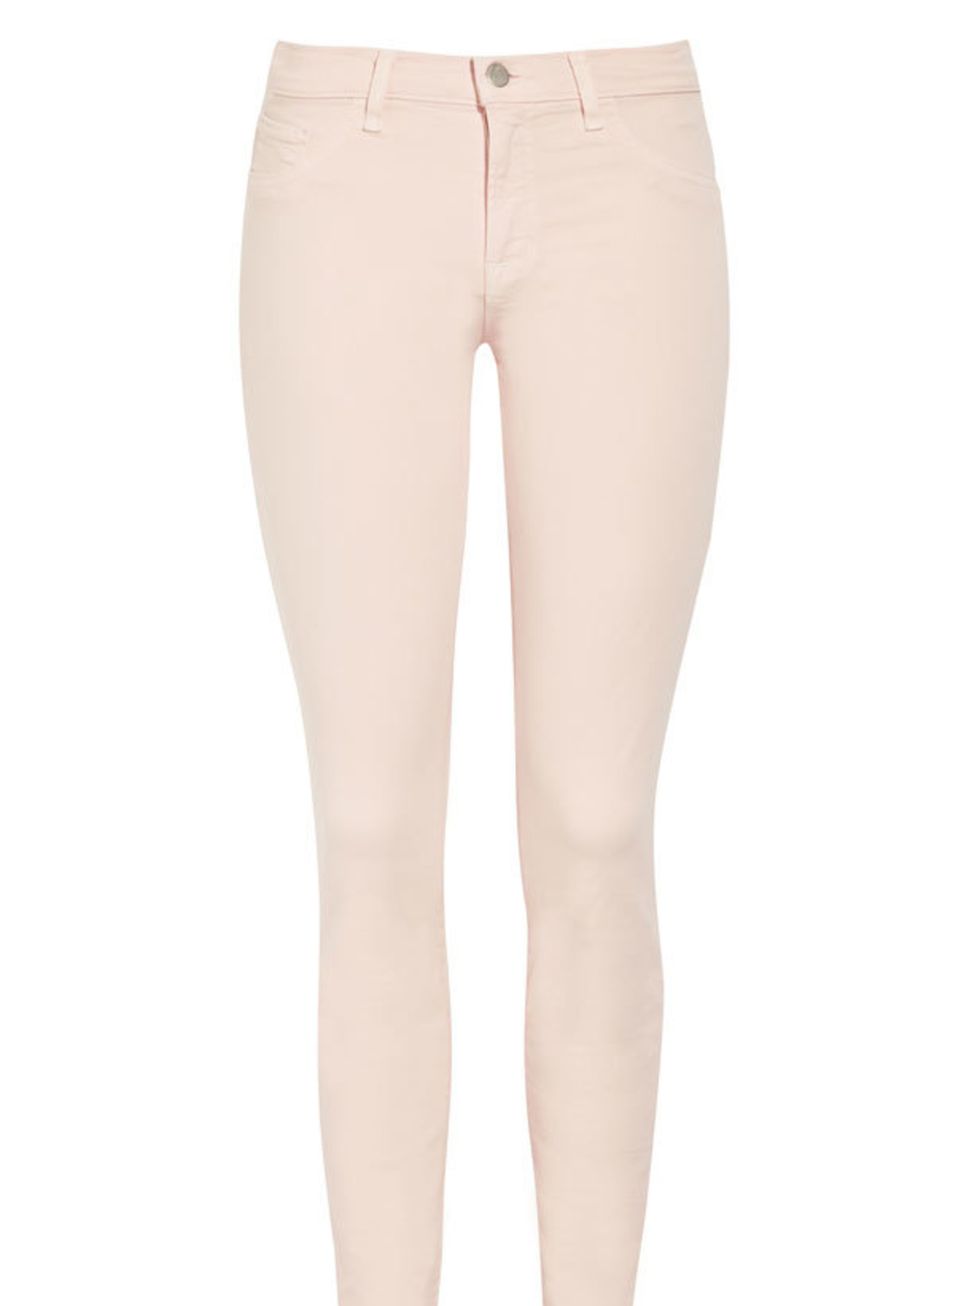 <p>J Brand  cropped skinny jeans, £205, at <a href="http://www.net-a-porter.com/product/168633">Net-a-Porter</a></p>